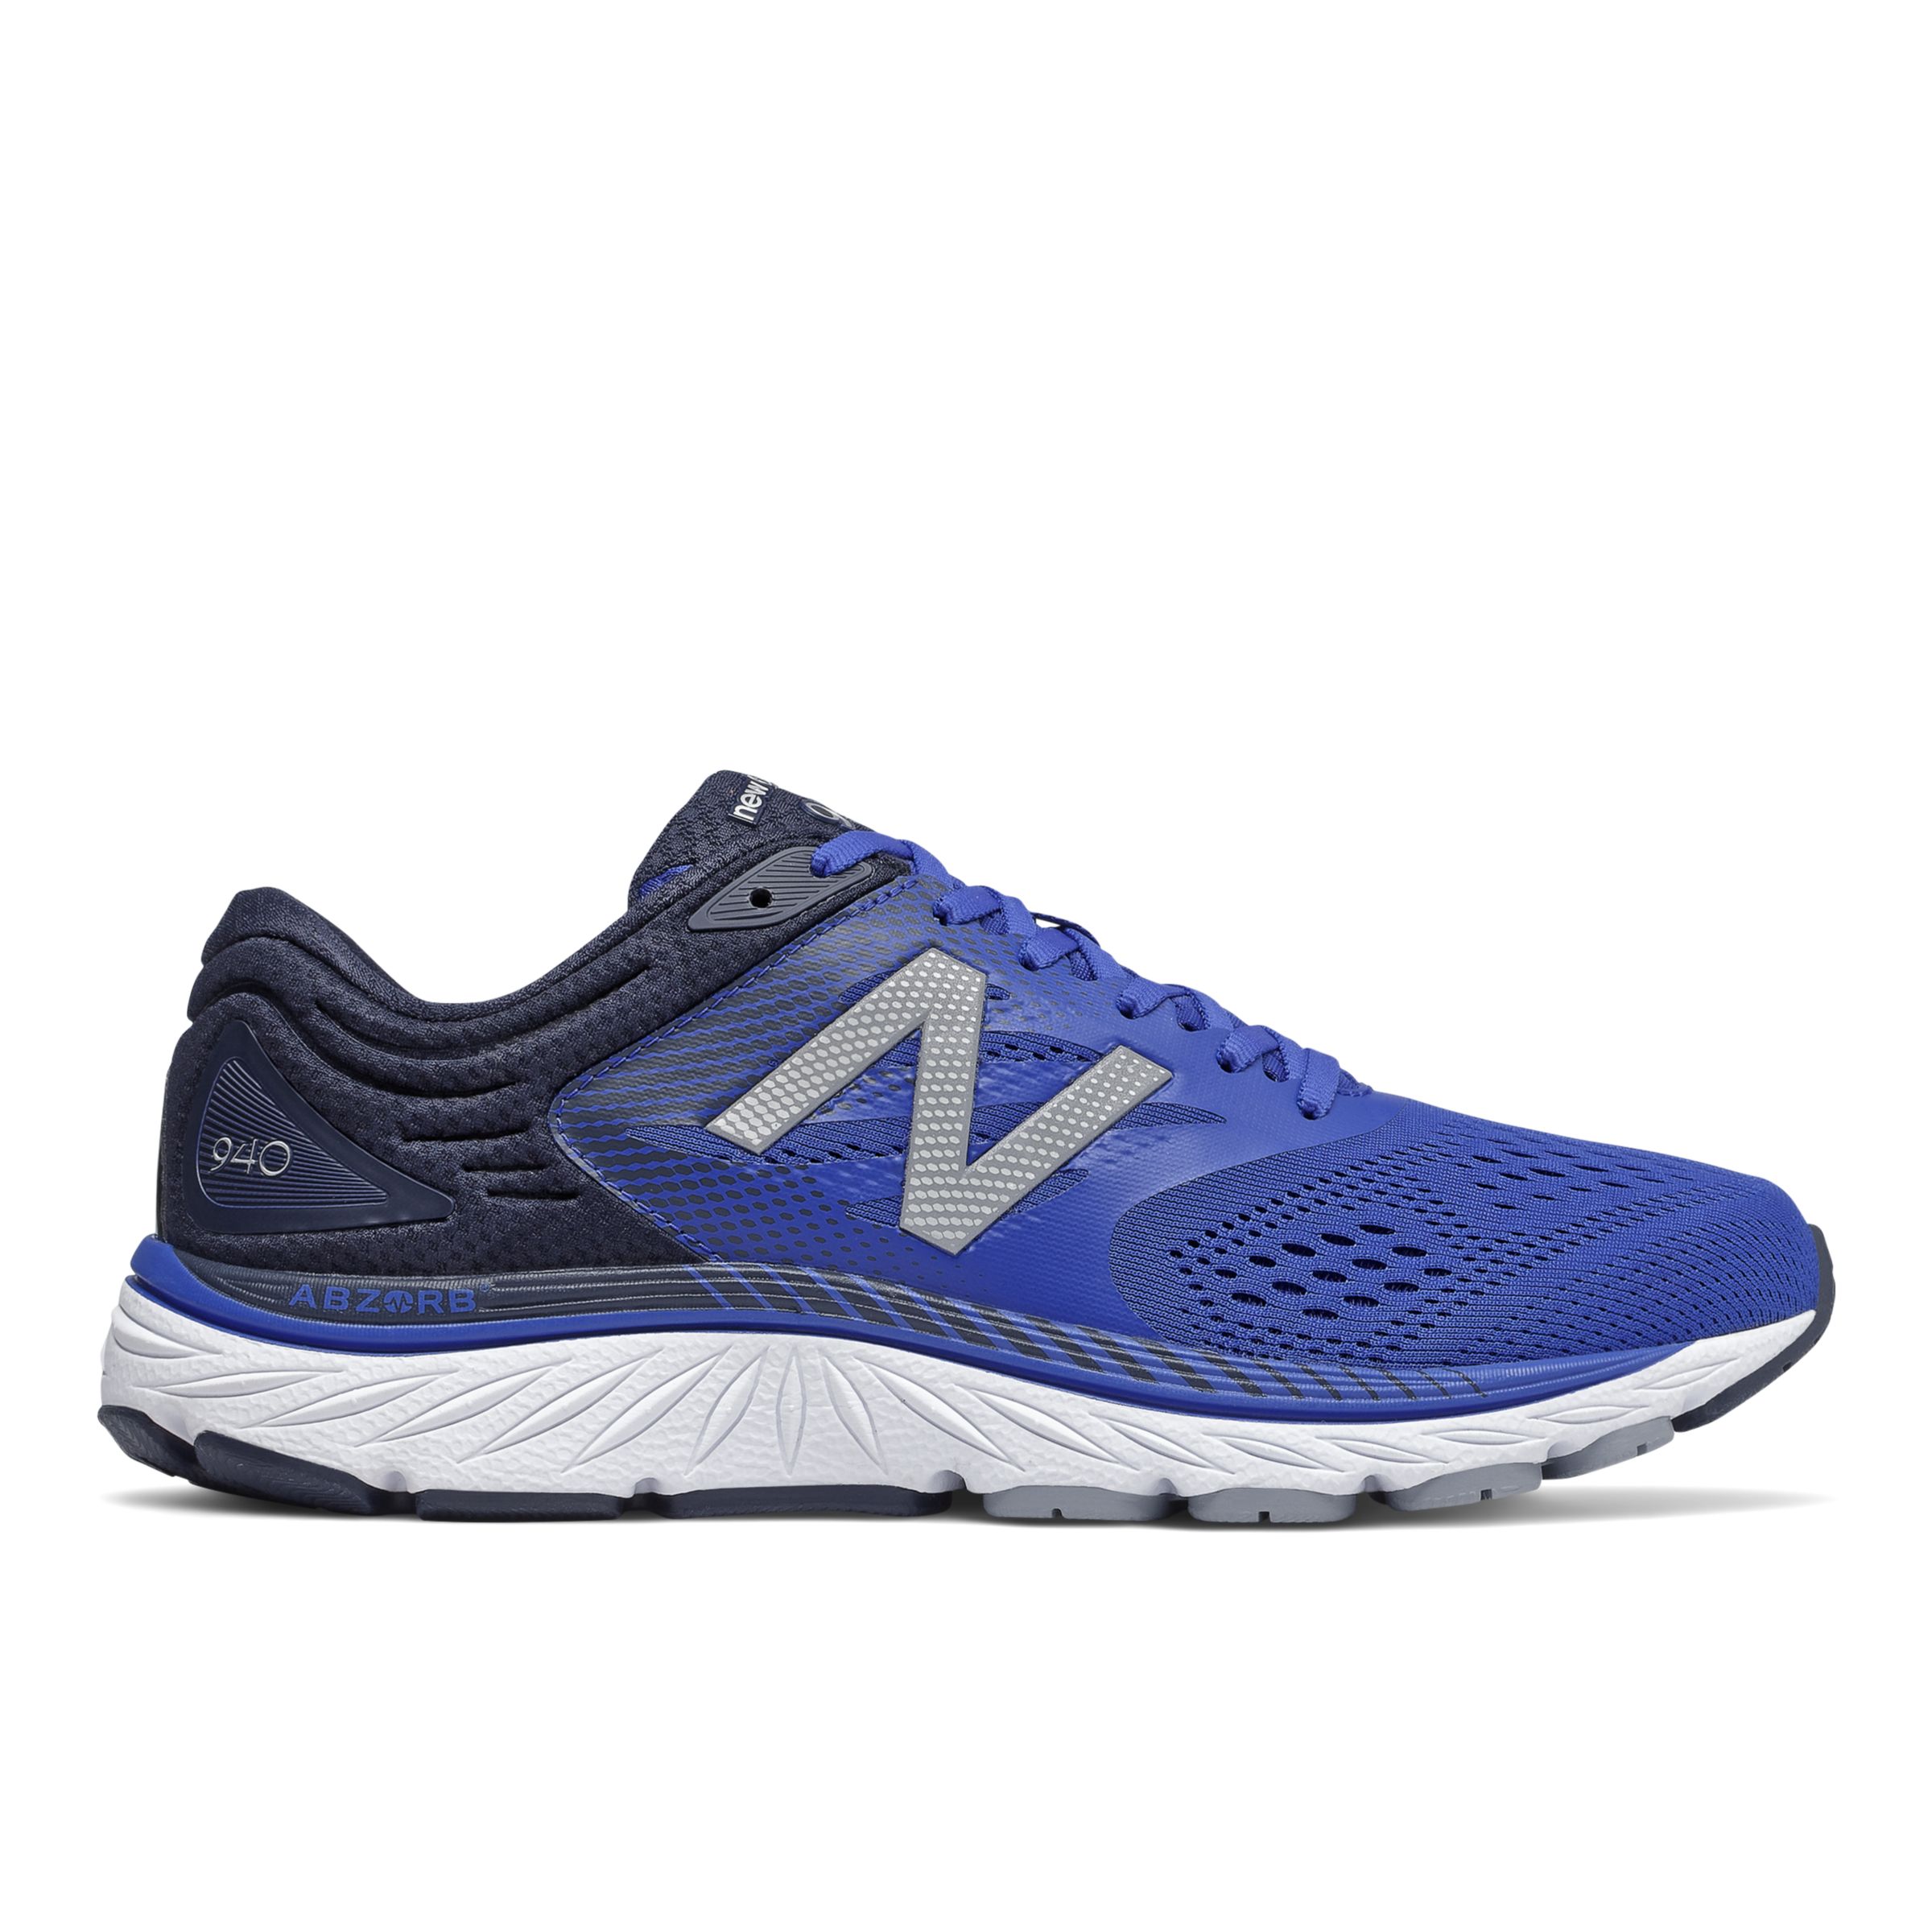 new balance running shoes for pronation